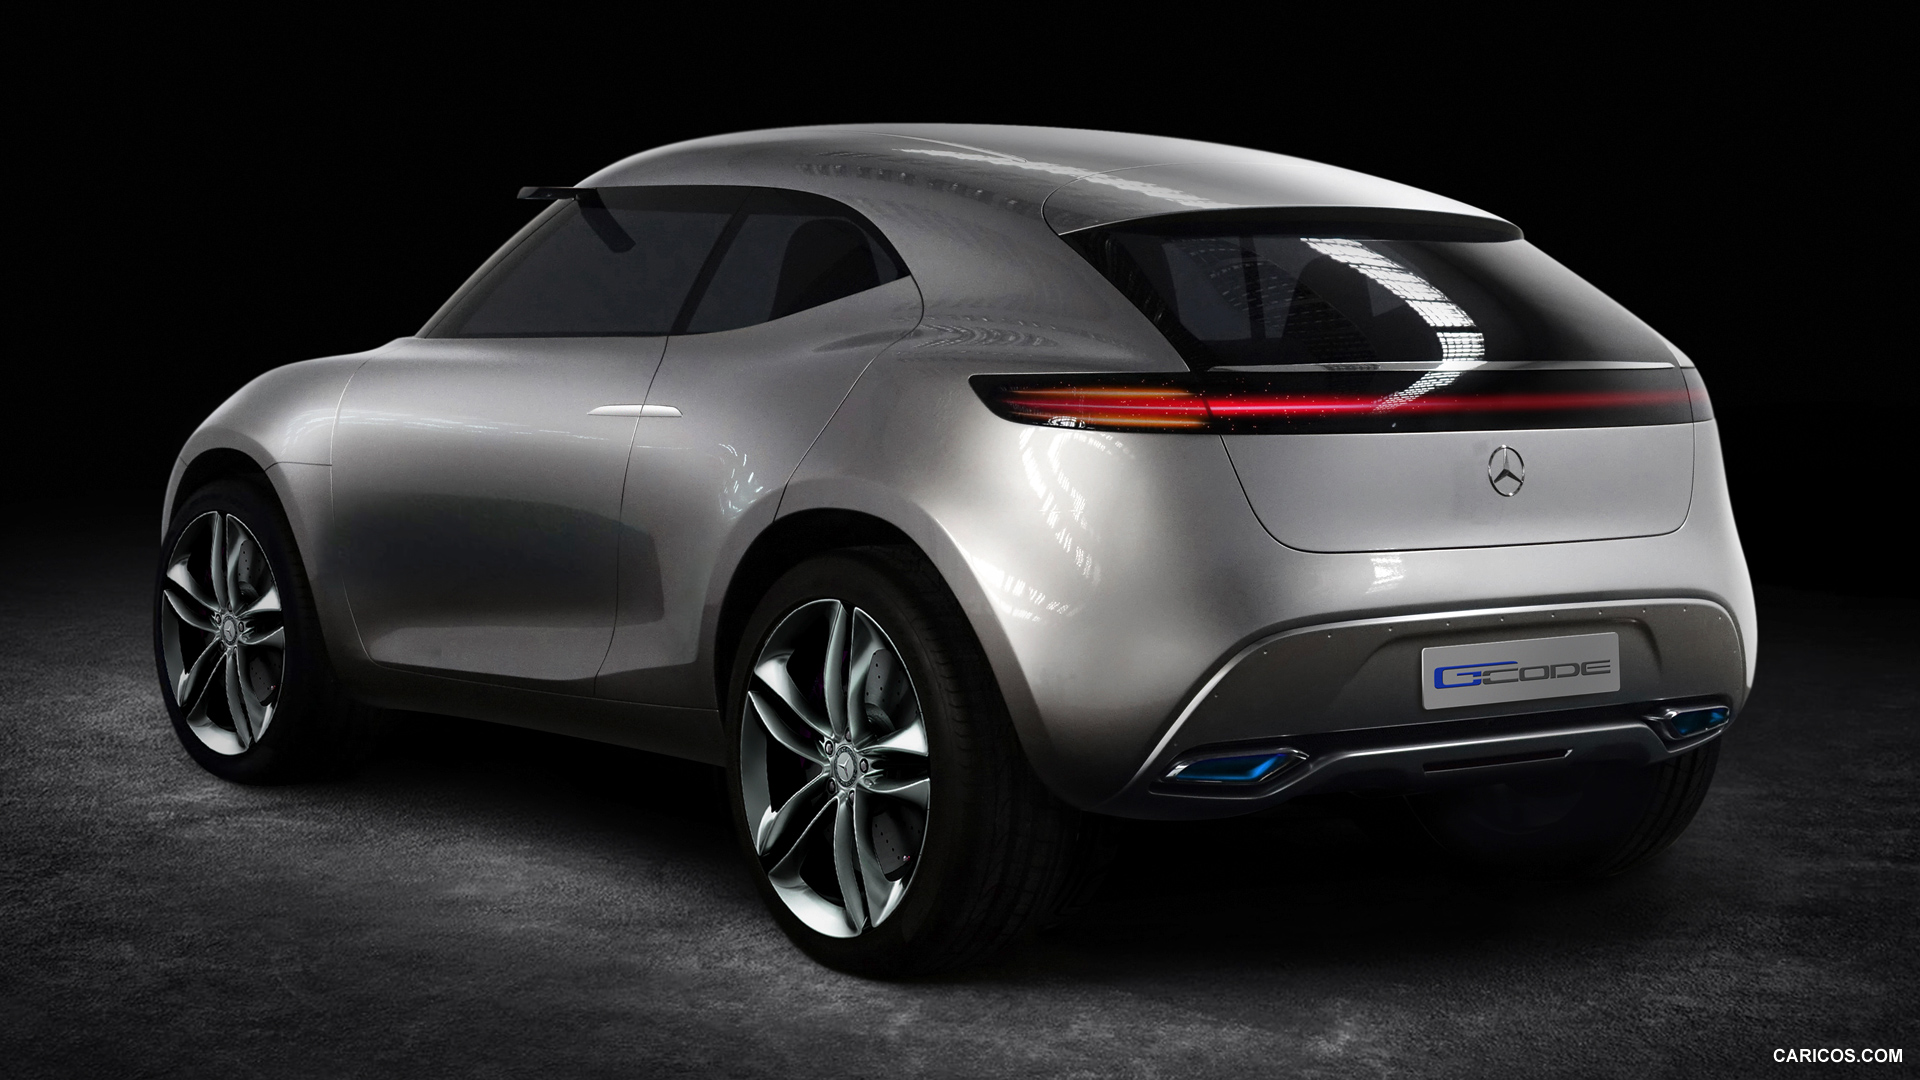 2014 Mercedes-Benz Vision G-Code SUC Concept  - Rear, #8 of 19